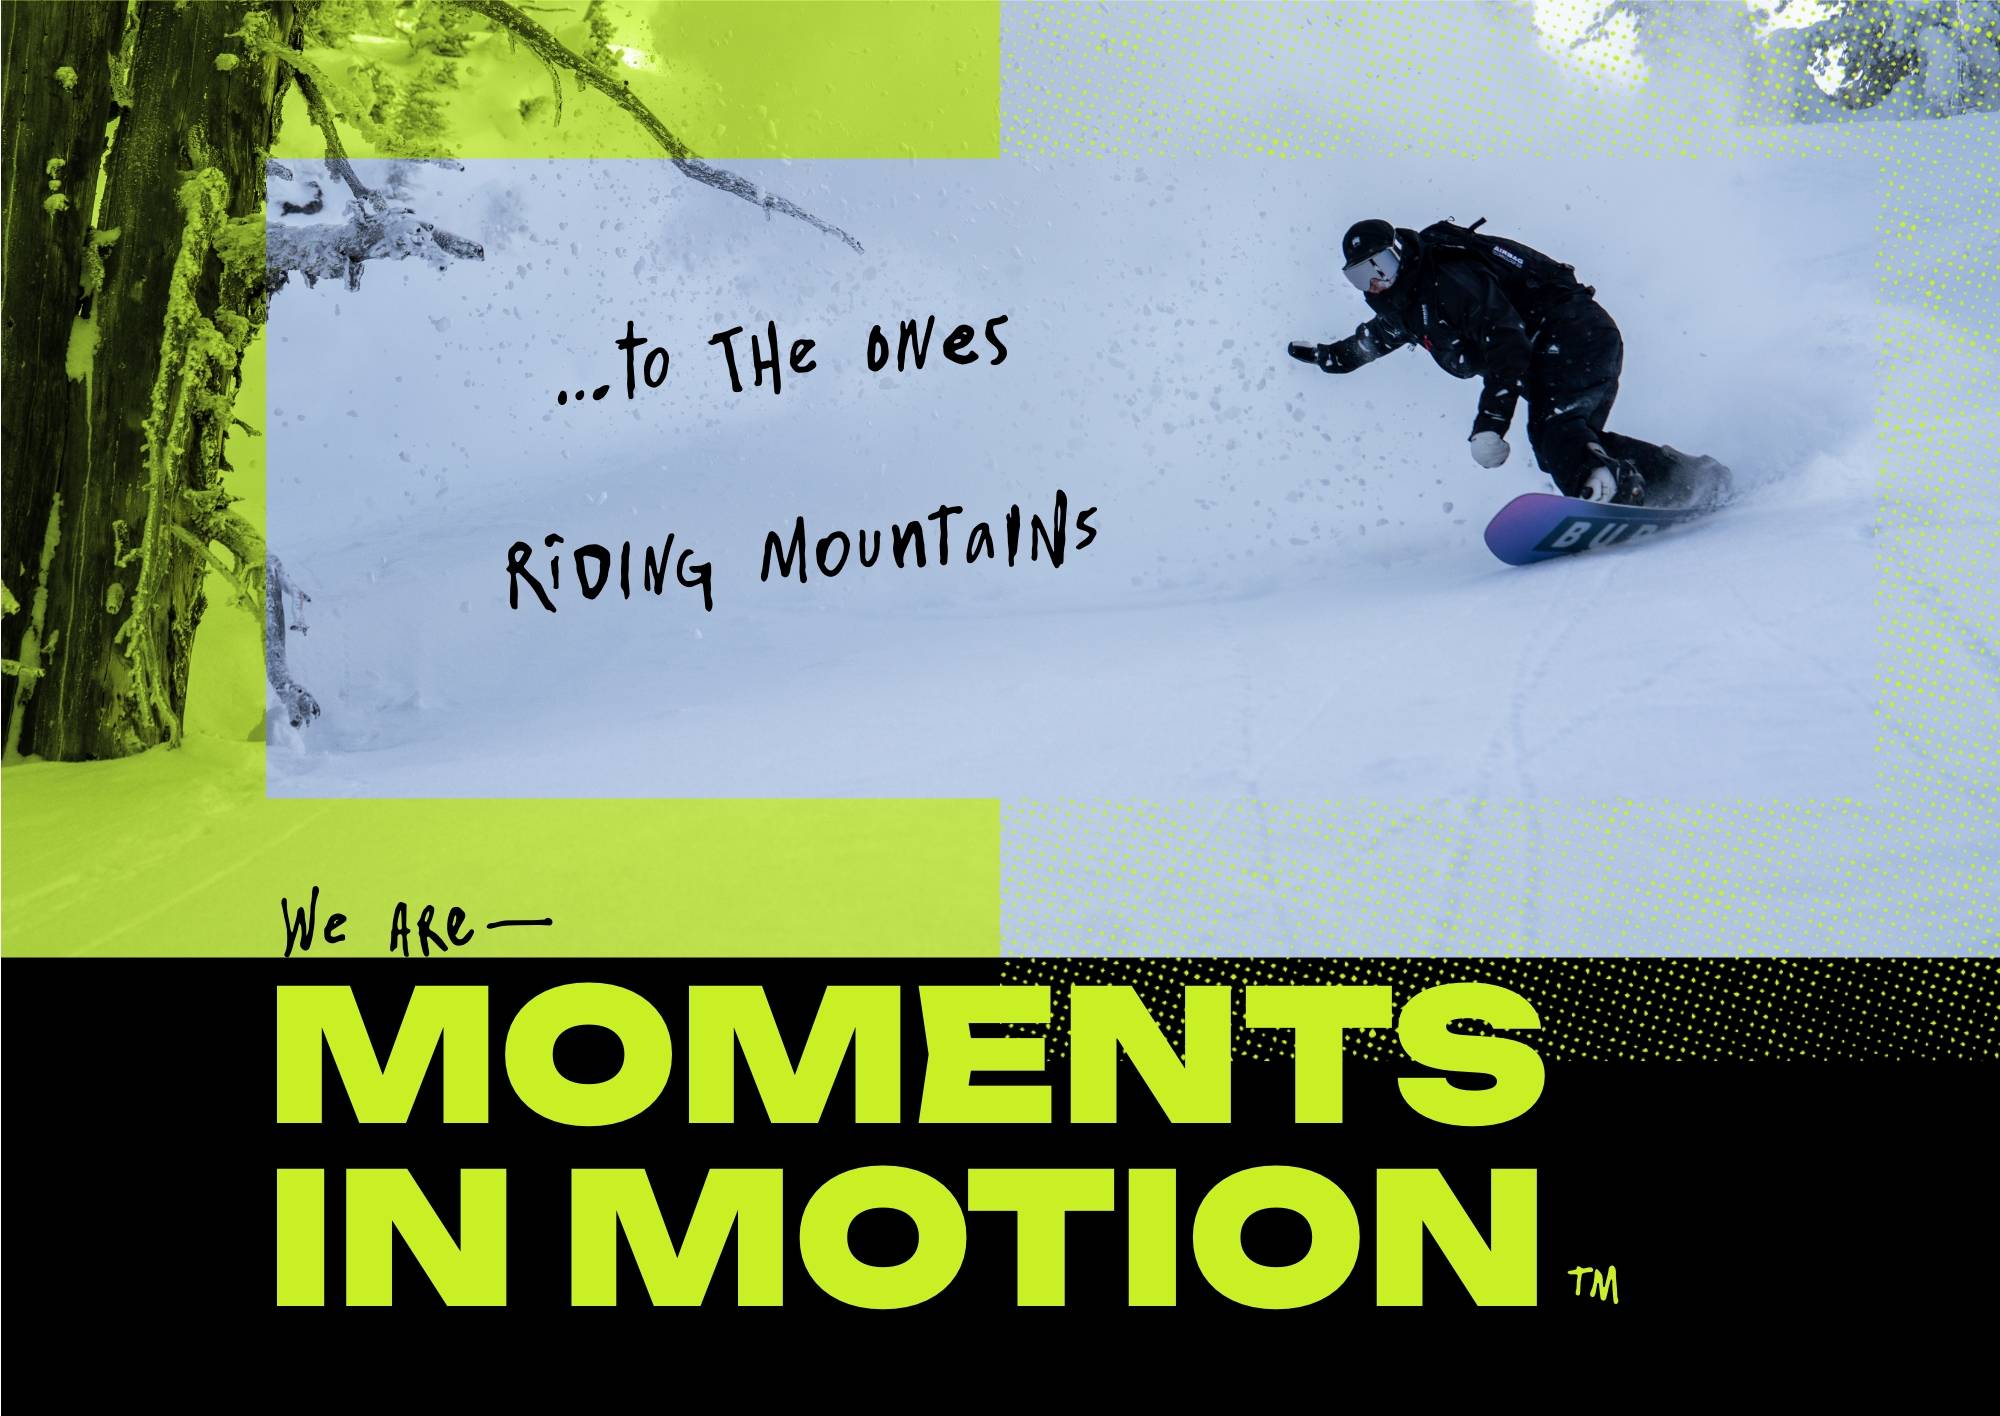 ...to the ones riding mountains. We are moments in motion.